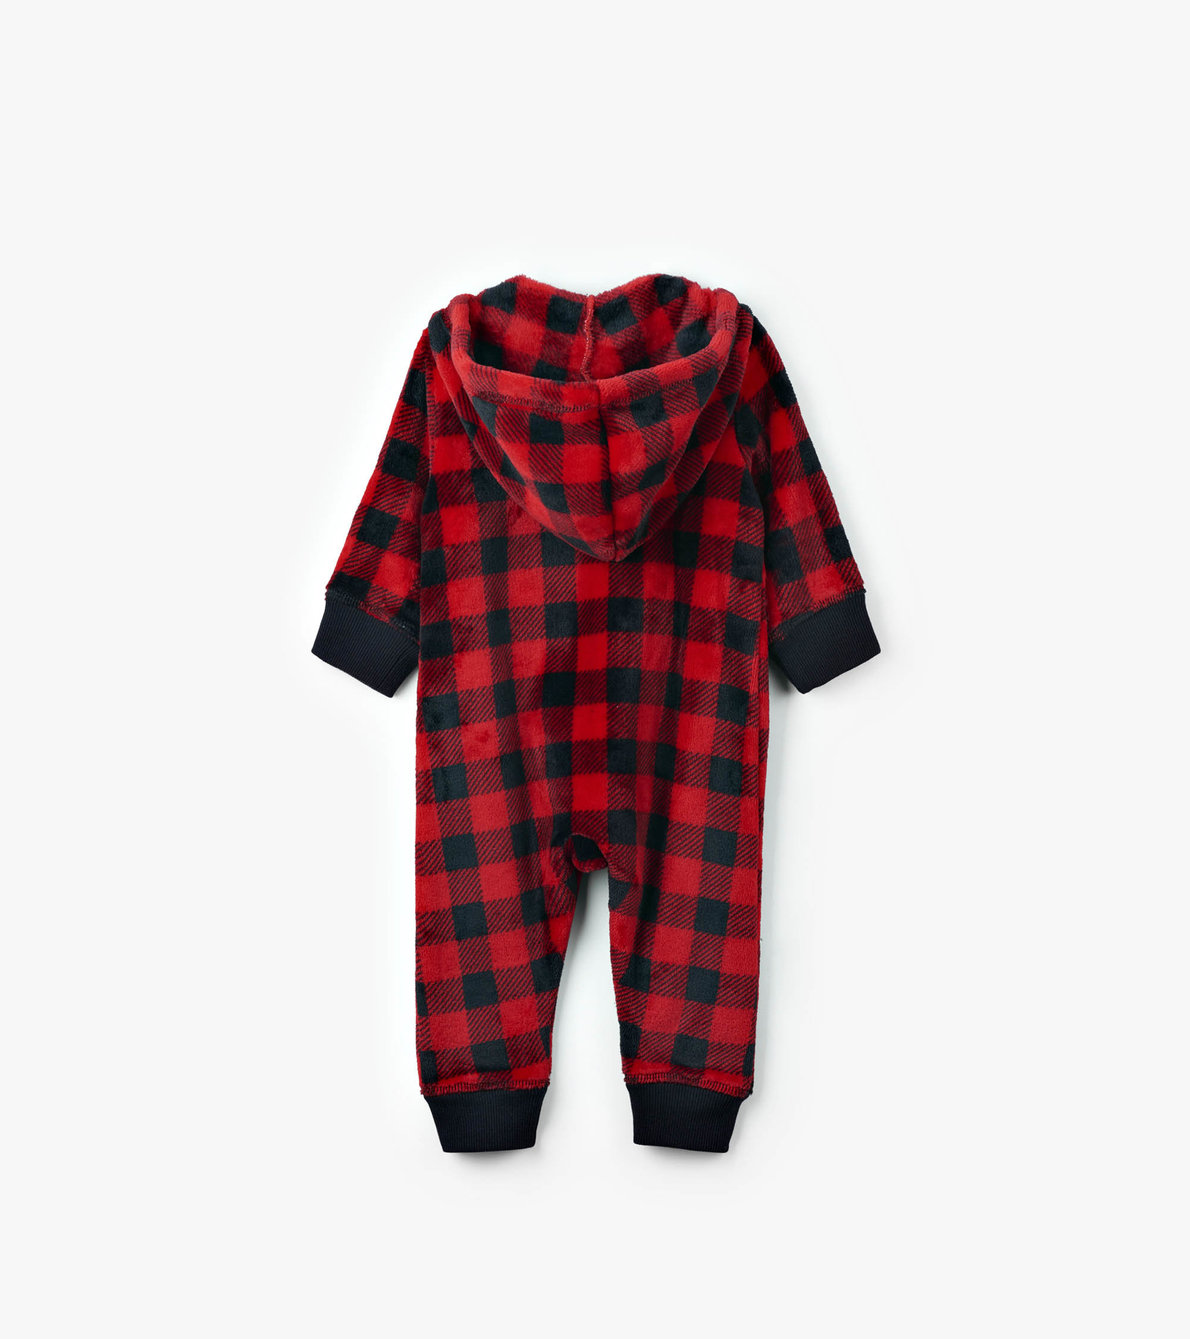 View larger image of Baby Buffalo Plaid Hooded Fleece Jumpsuit